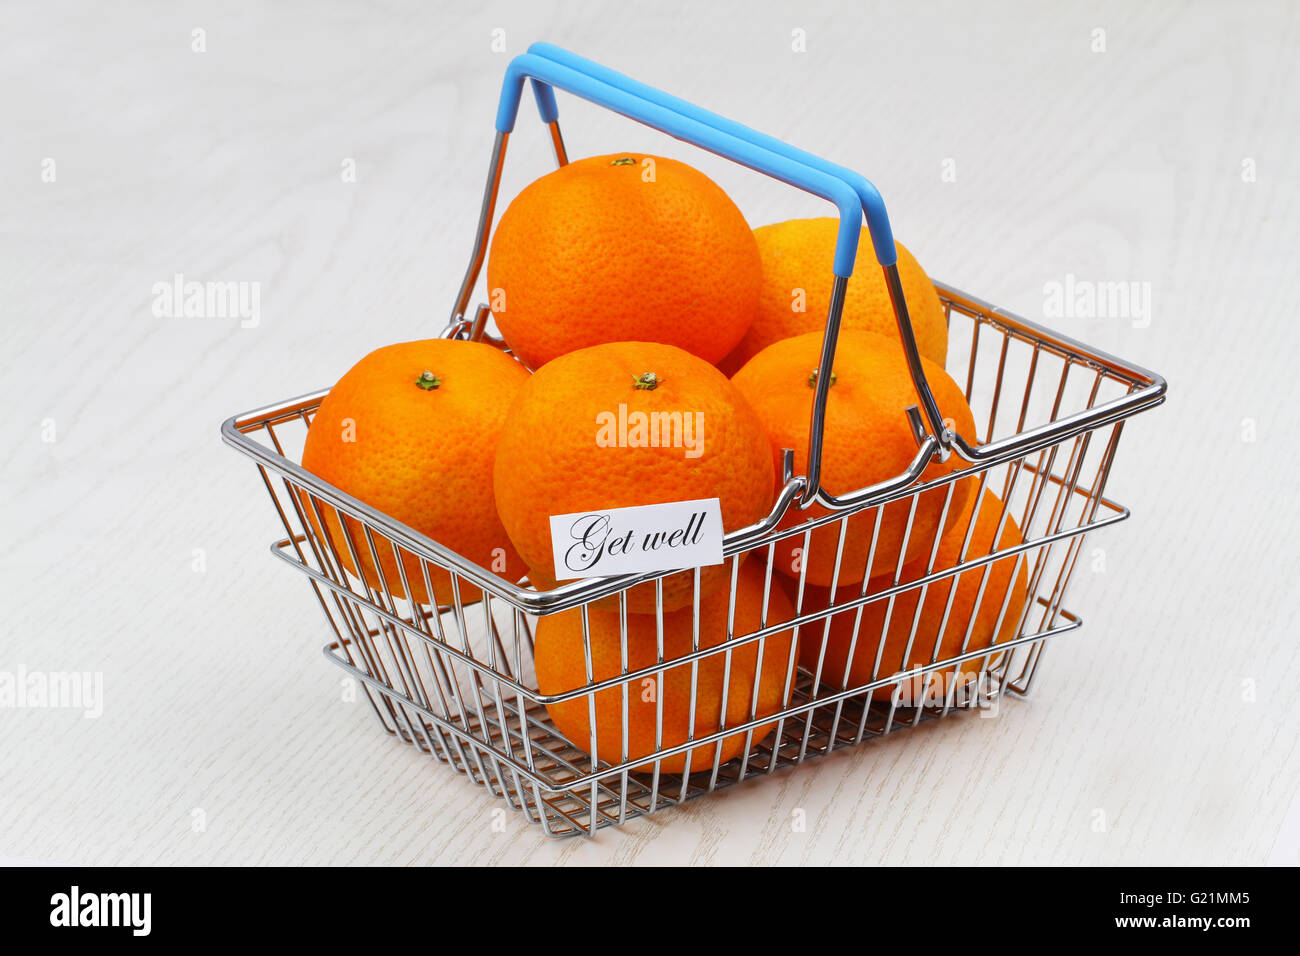 Get well card with miniature shopping basket full of mandarines Stock Photo